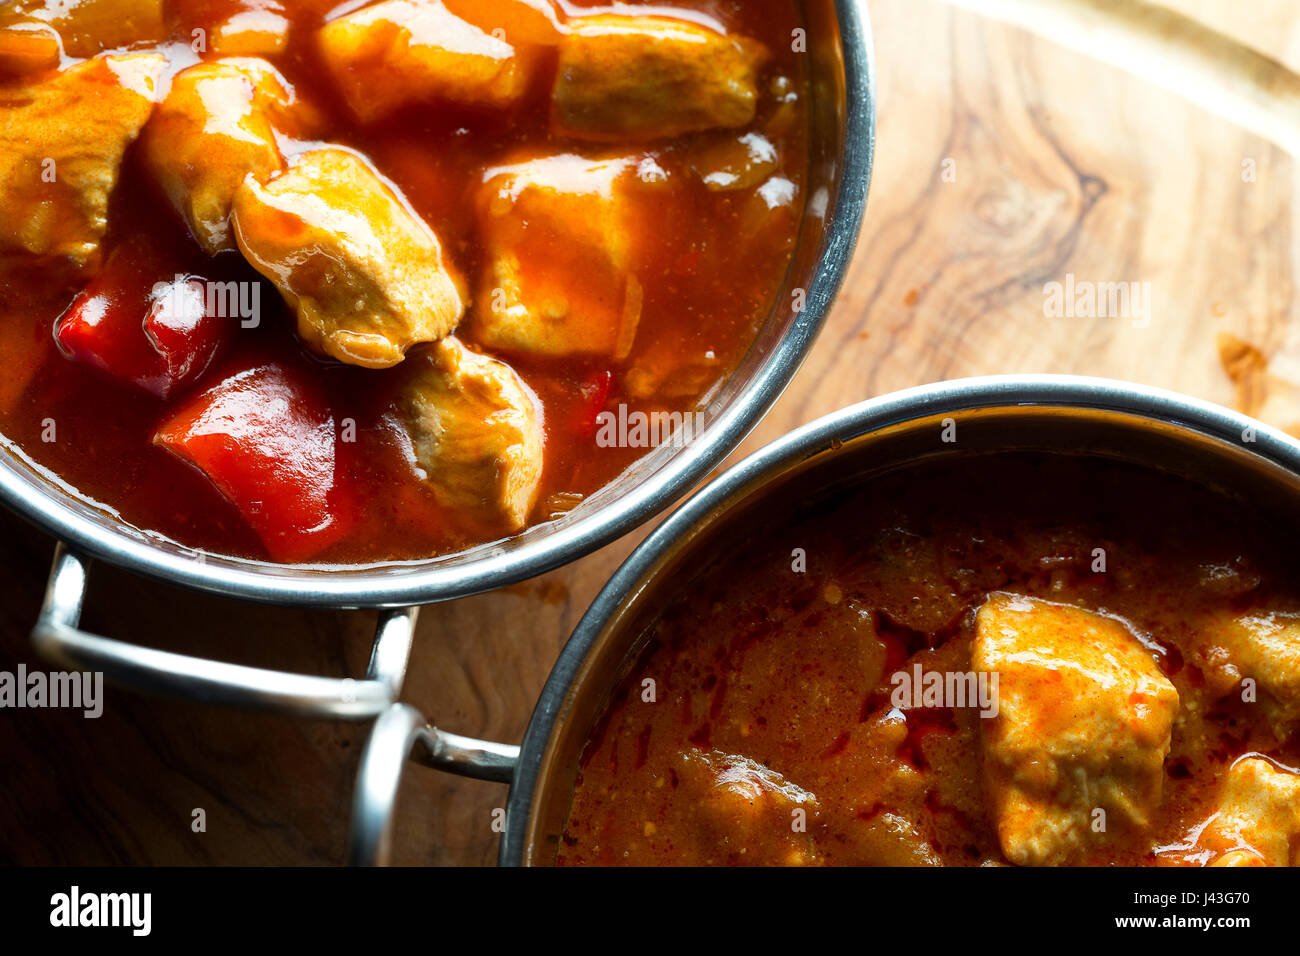 https://c8.alamy.com/comp/J43G70/close-up-view-from-above-of-curry-in-balti-dishes-on-a-wooden-slab-J43G70.jpg